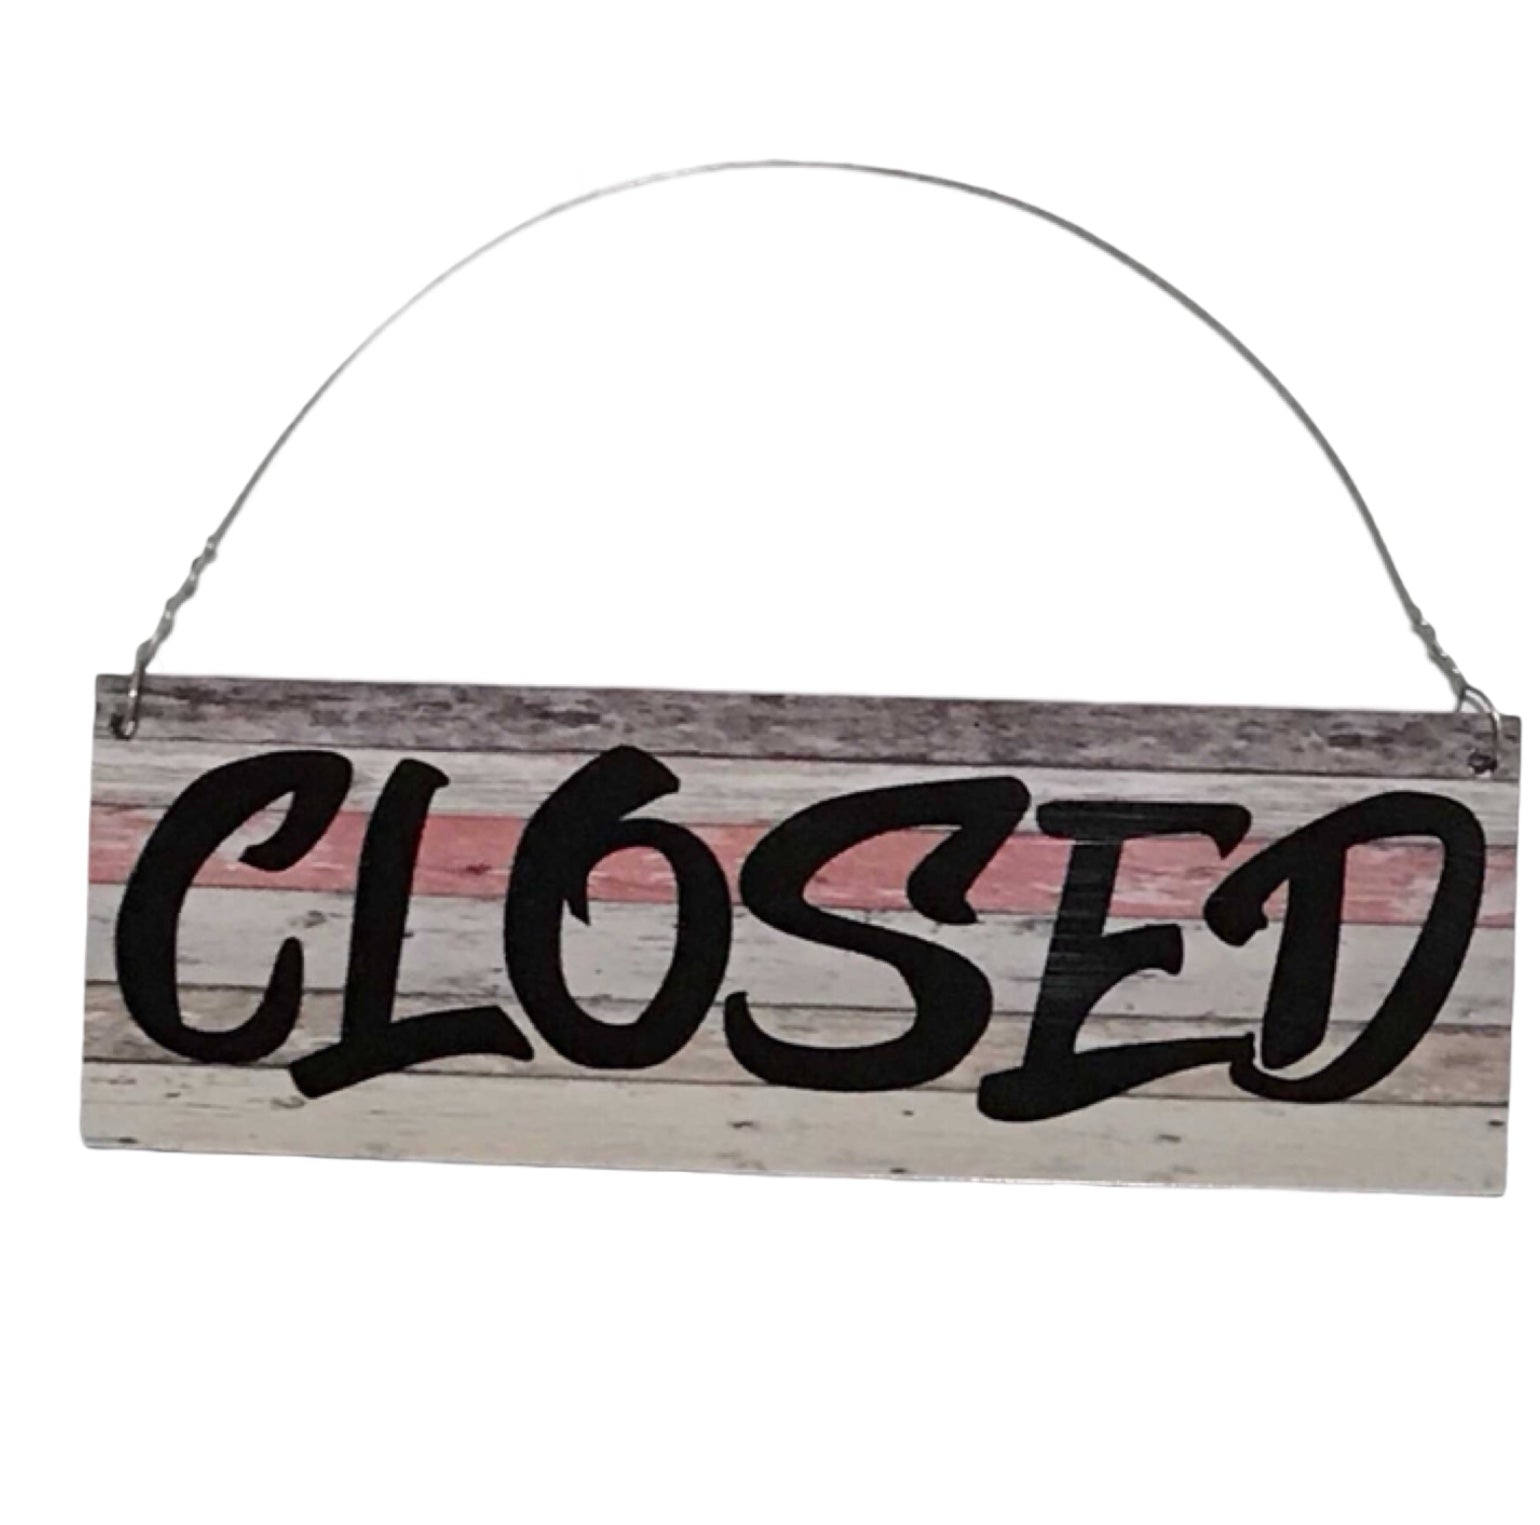 Open Closed Rustic Wood Style Business Shop Cafe Hanging Sign - The Renmy Store Homewares & Gifts 